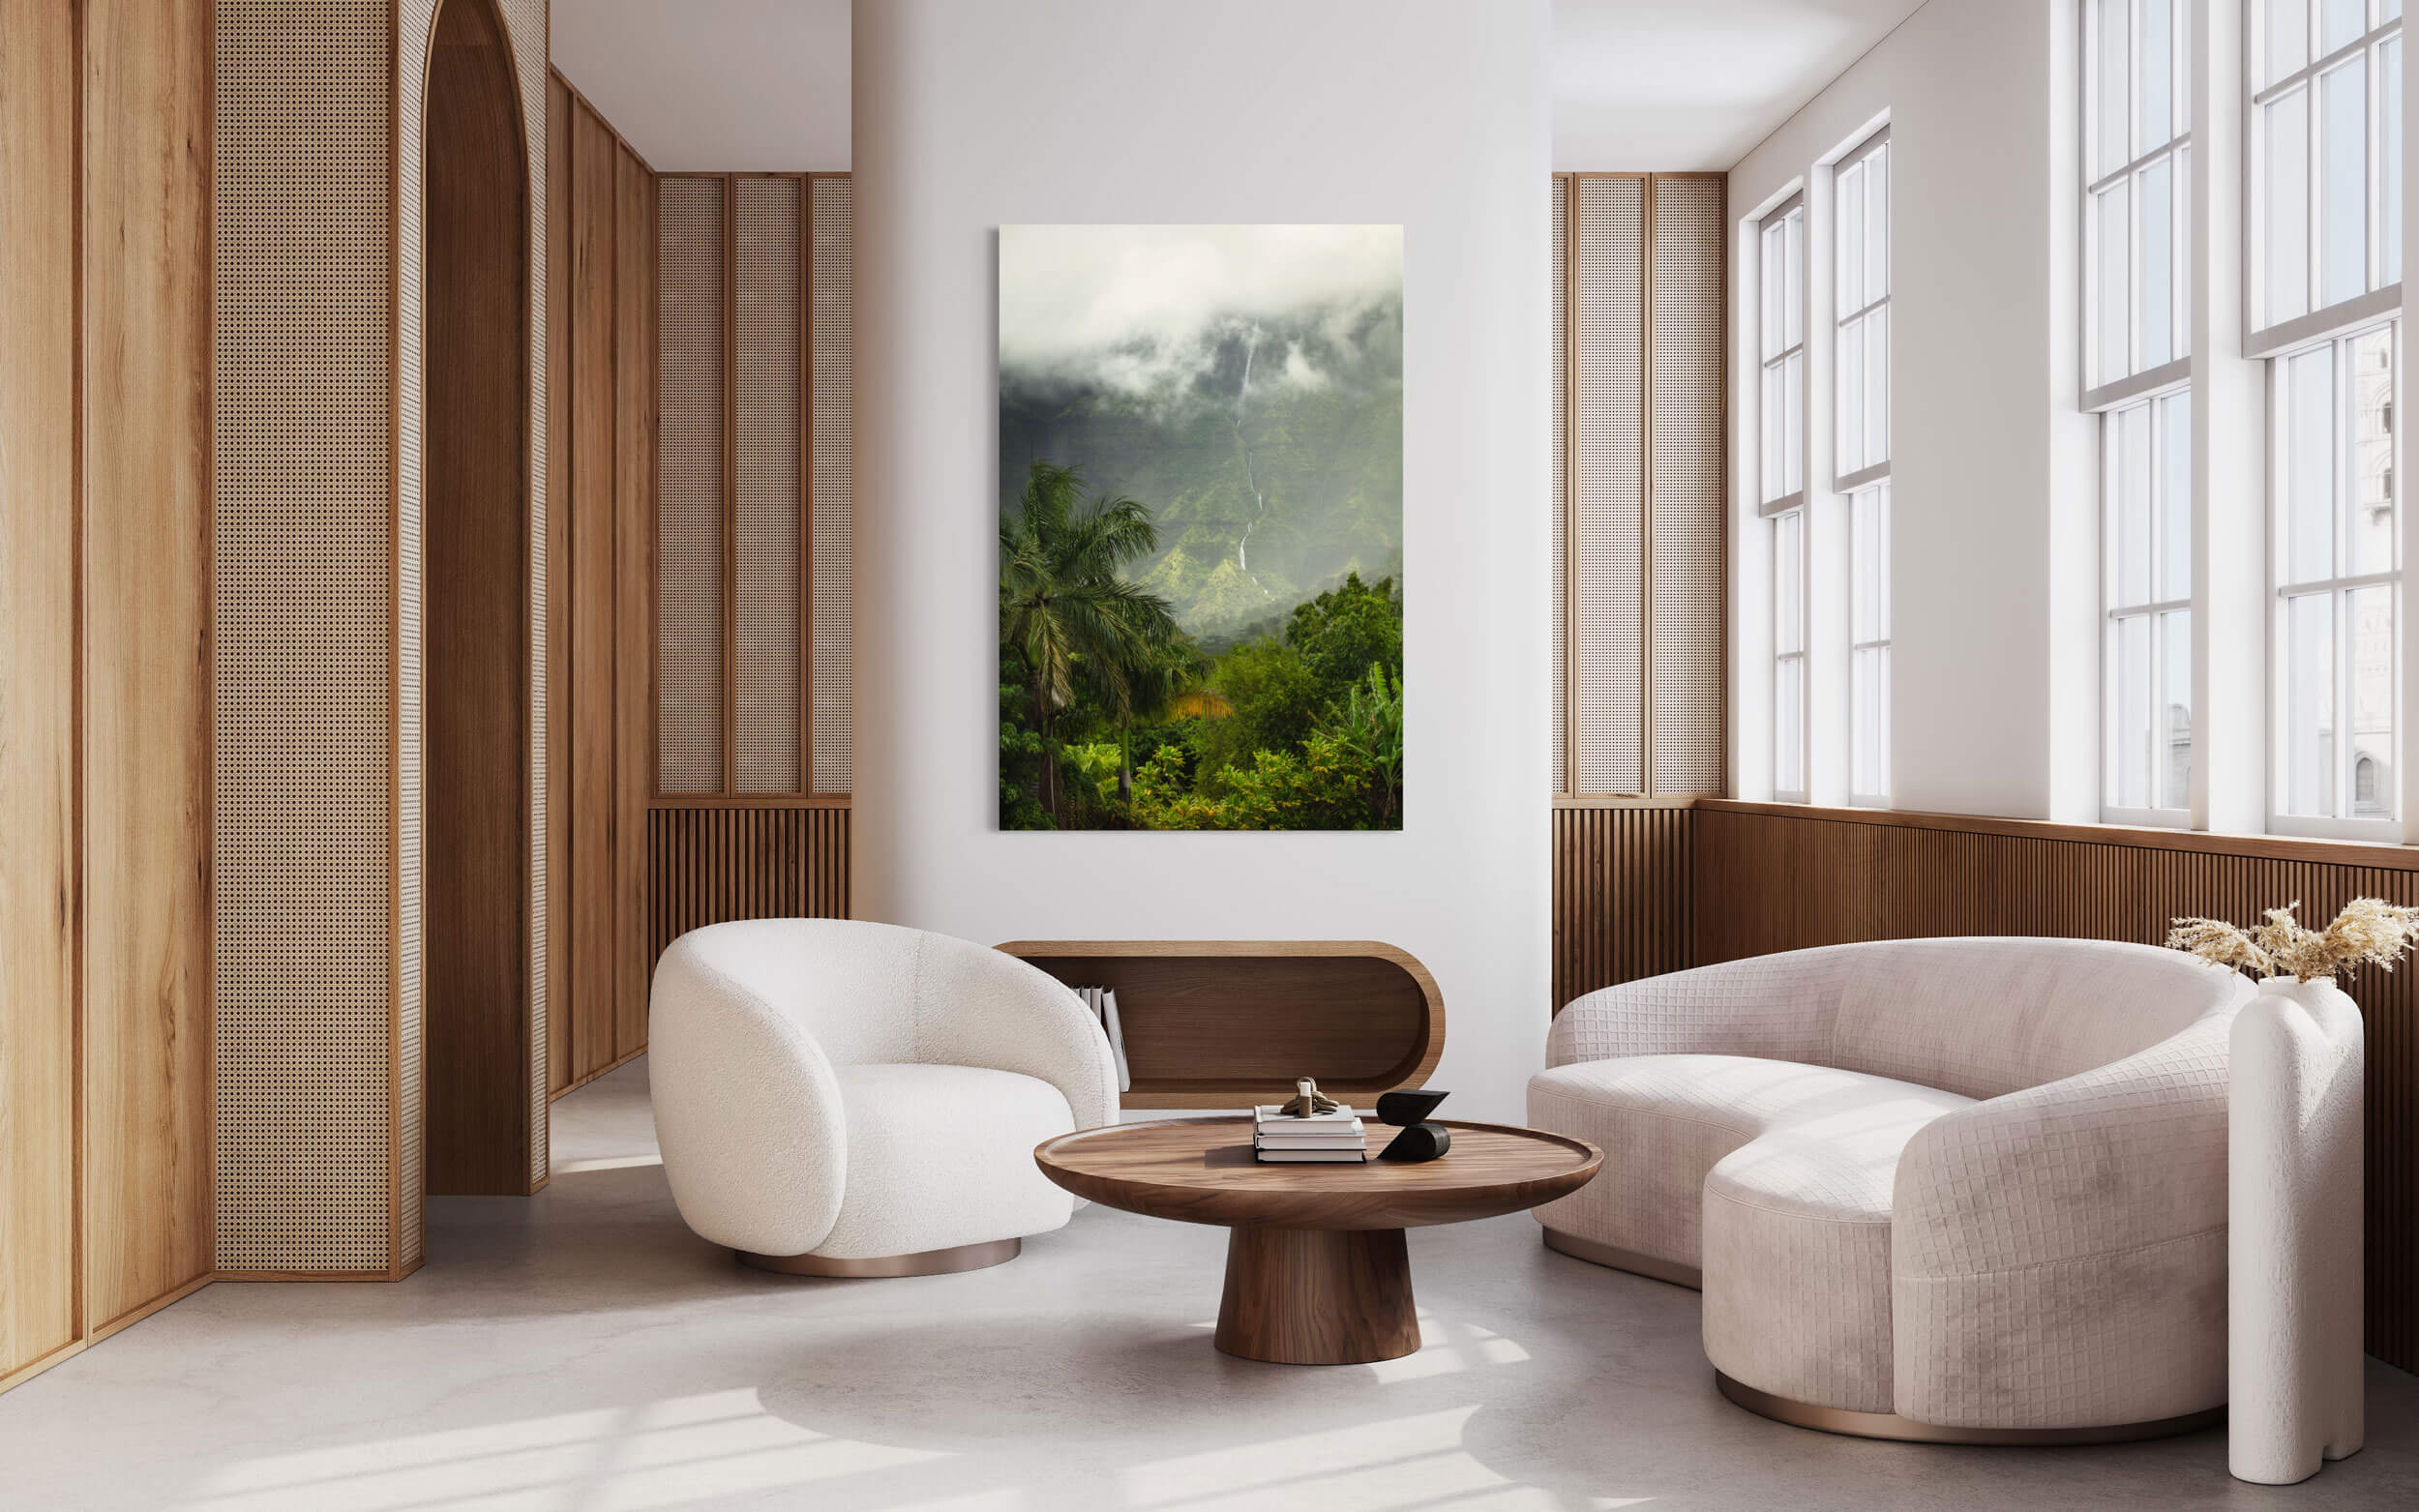 A piece of Kauai art showing a waterfall picture outside of Hanalei hangs in a living room.